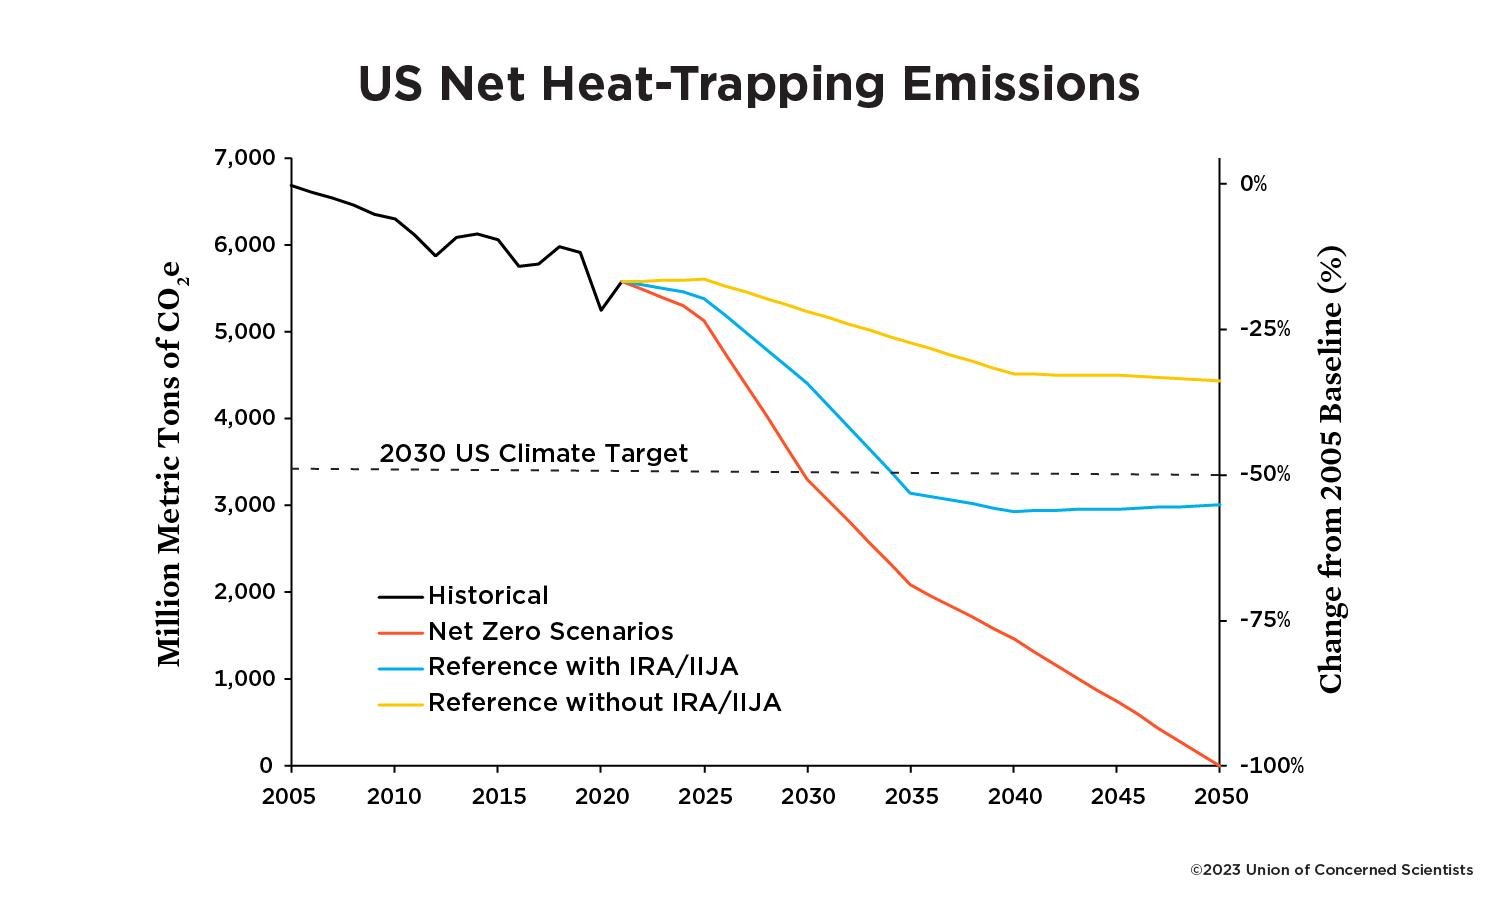 A line chart that compares US emissions over time under several different scenarios